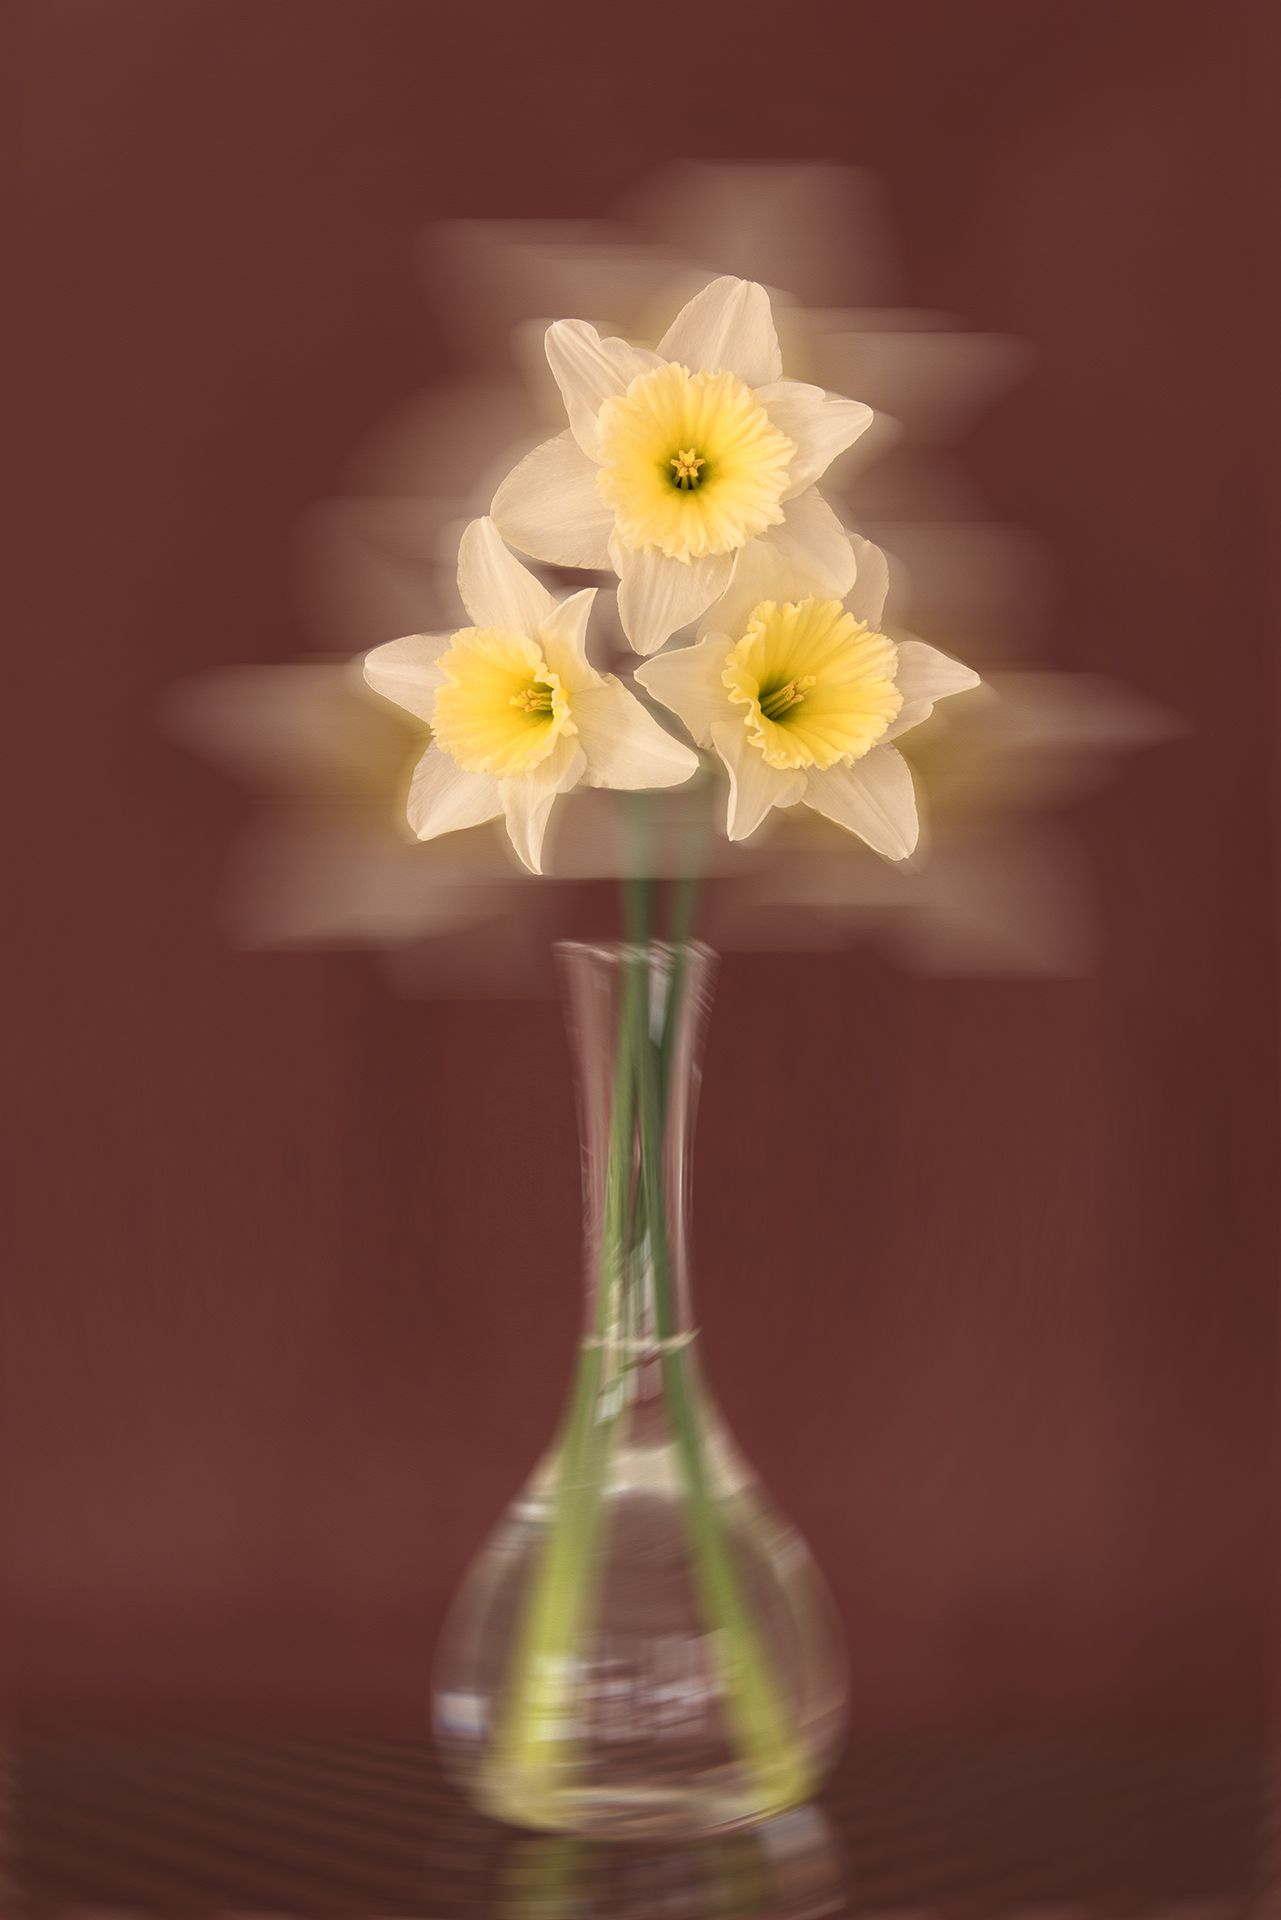 color, colors, concept, conceptual, daffodil, daffodils, narcissus, nature, photograph, photography, spring, springtime, still life, white, yellow,, Dr Didi Baev